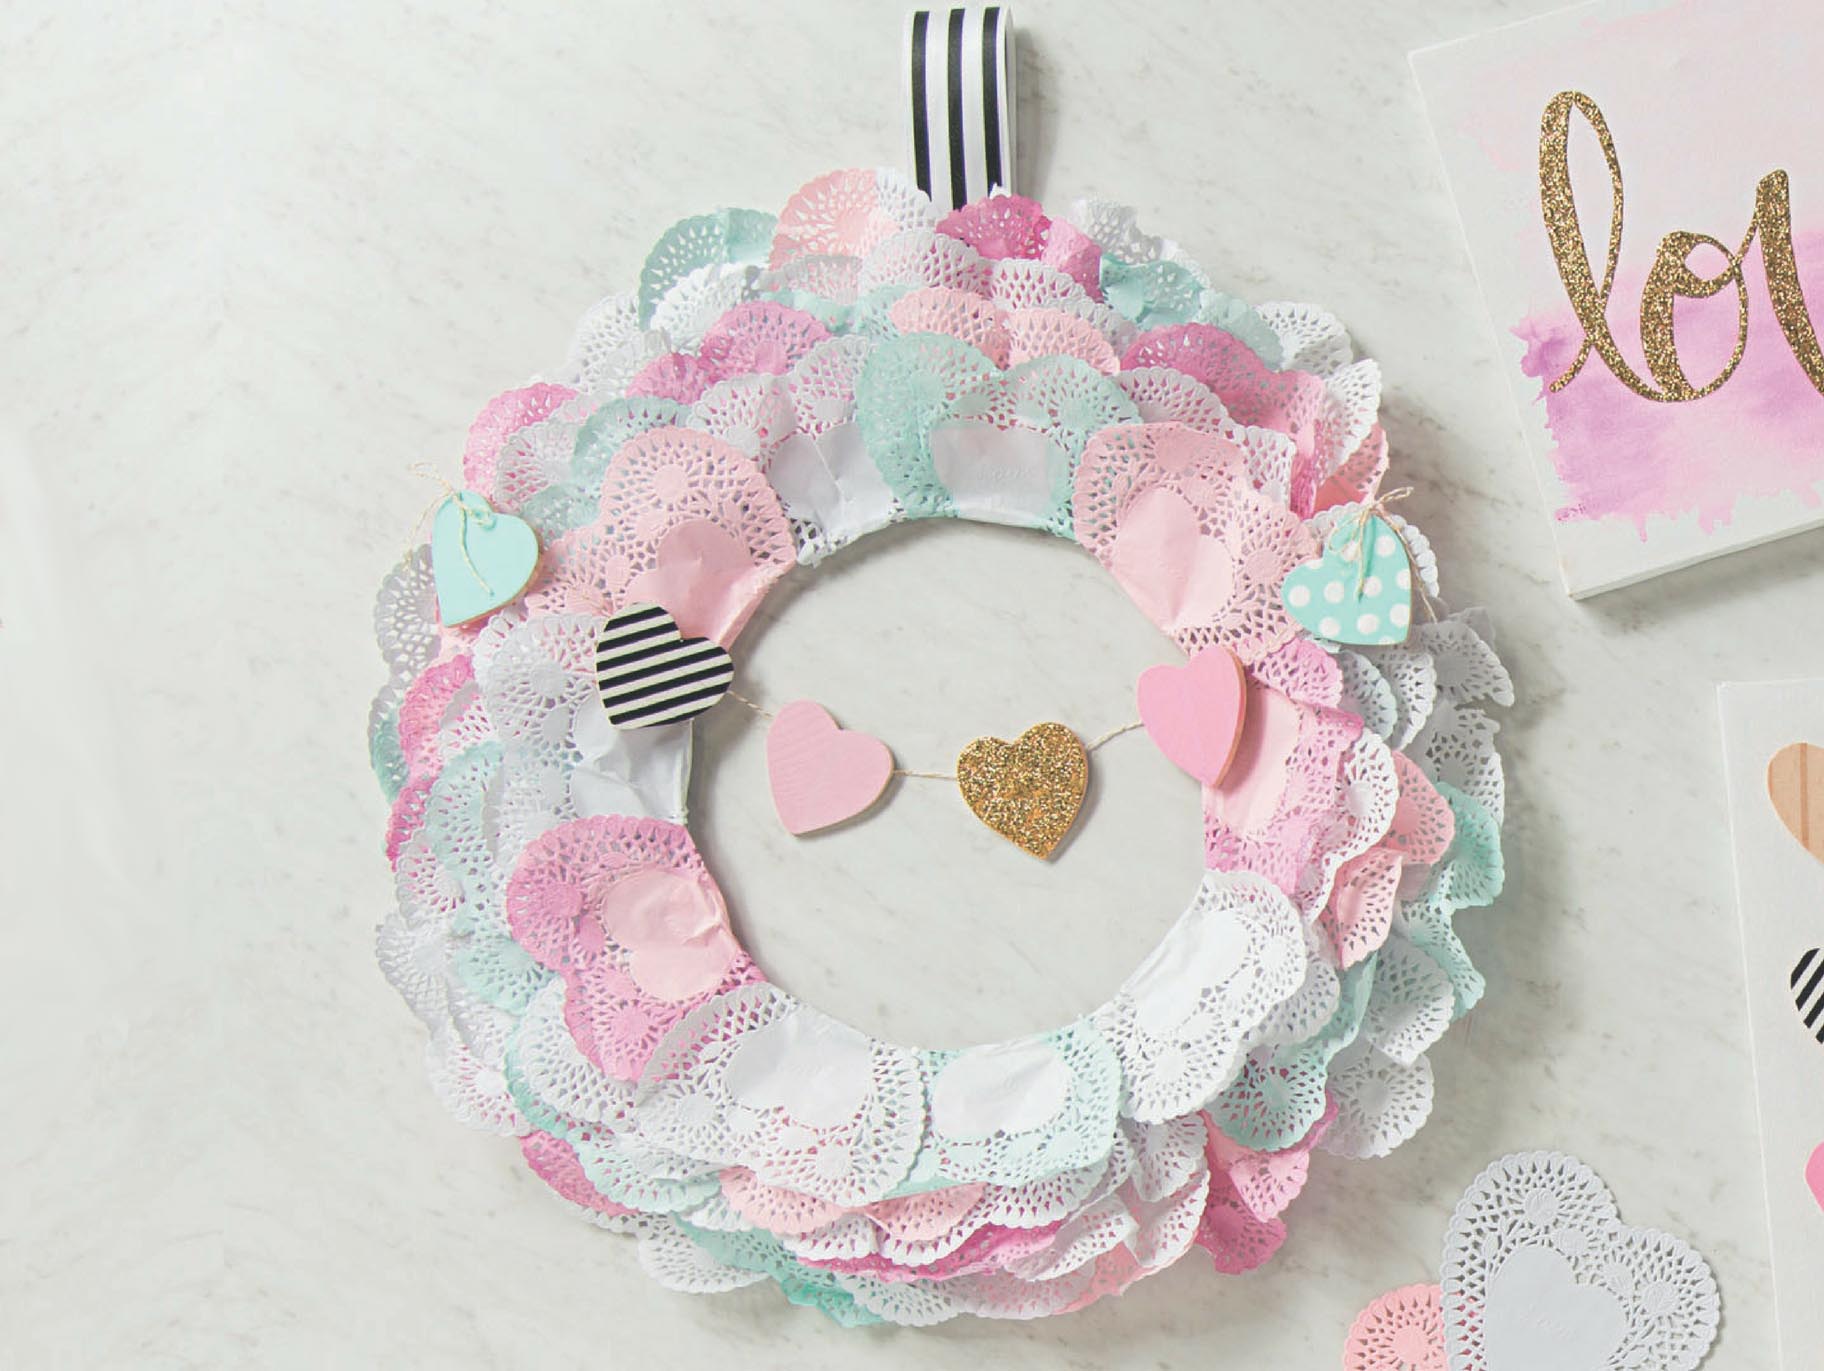 How To Make Paper Heart Doilies for Valentine's Day